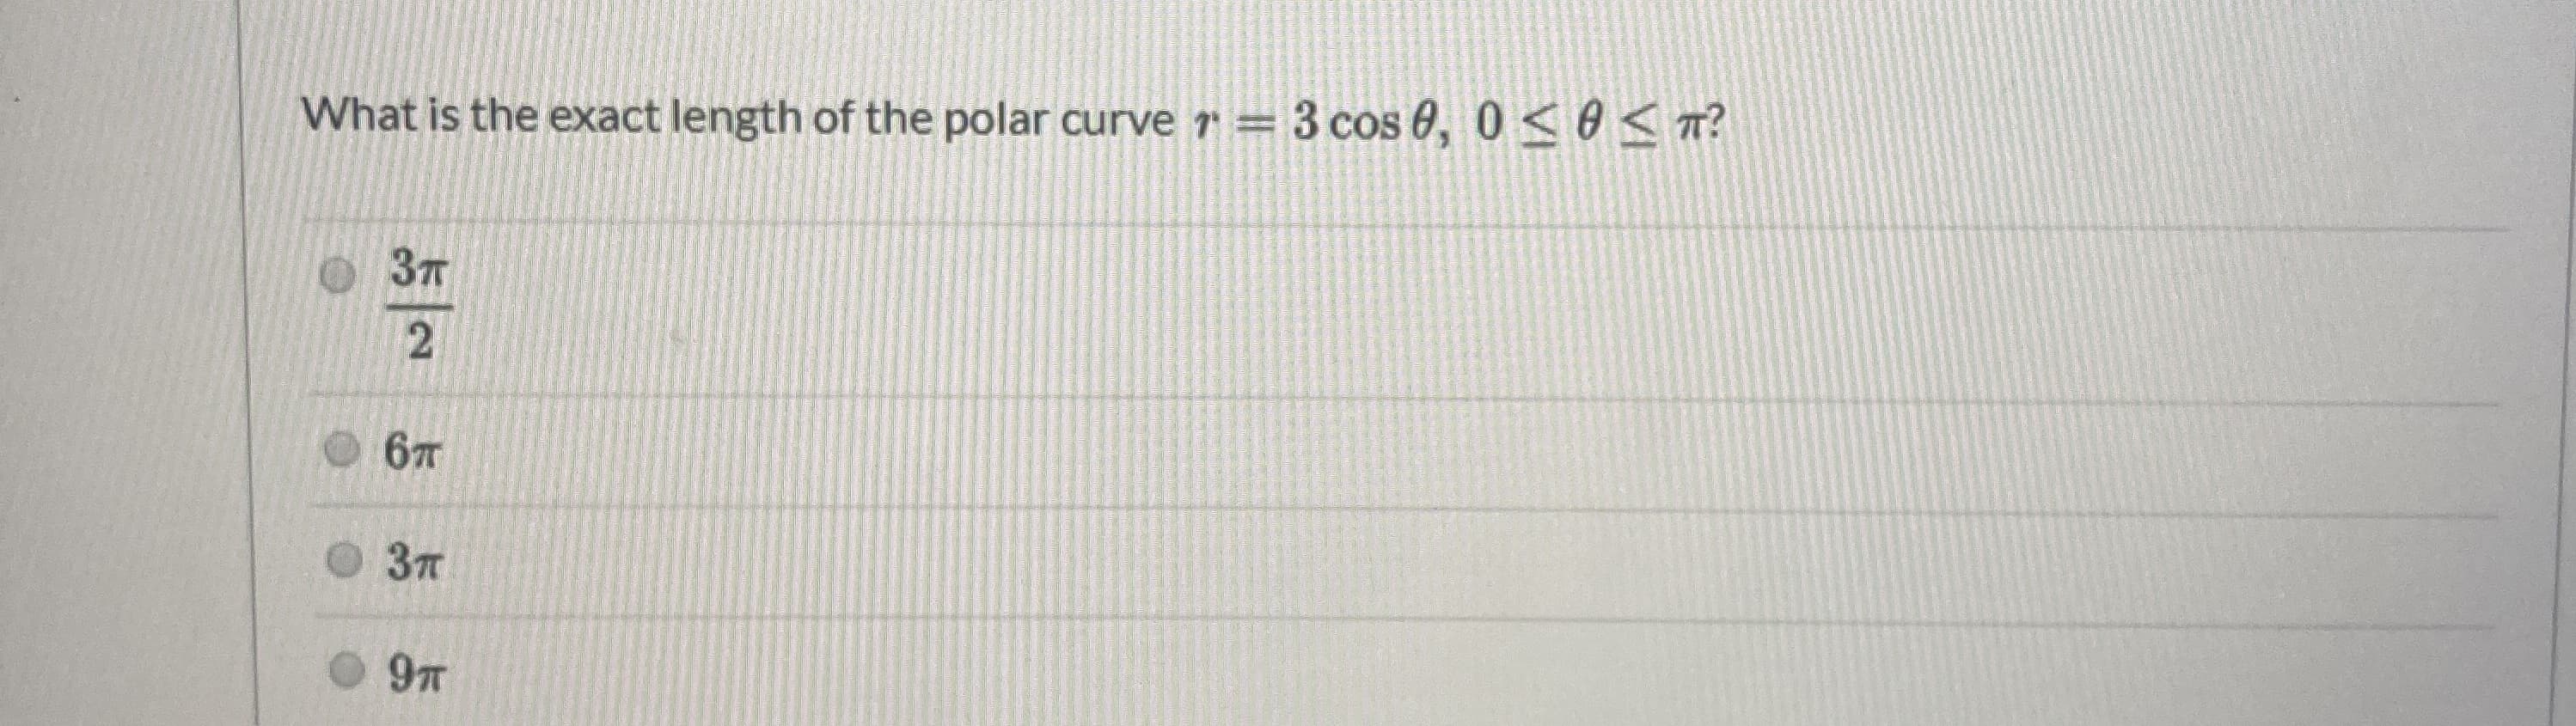 What is the exact length of the polar curve 1 = 3 cos 0, 0 O<T?
